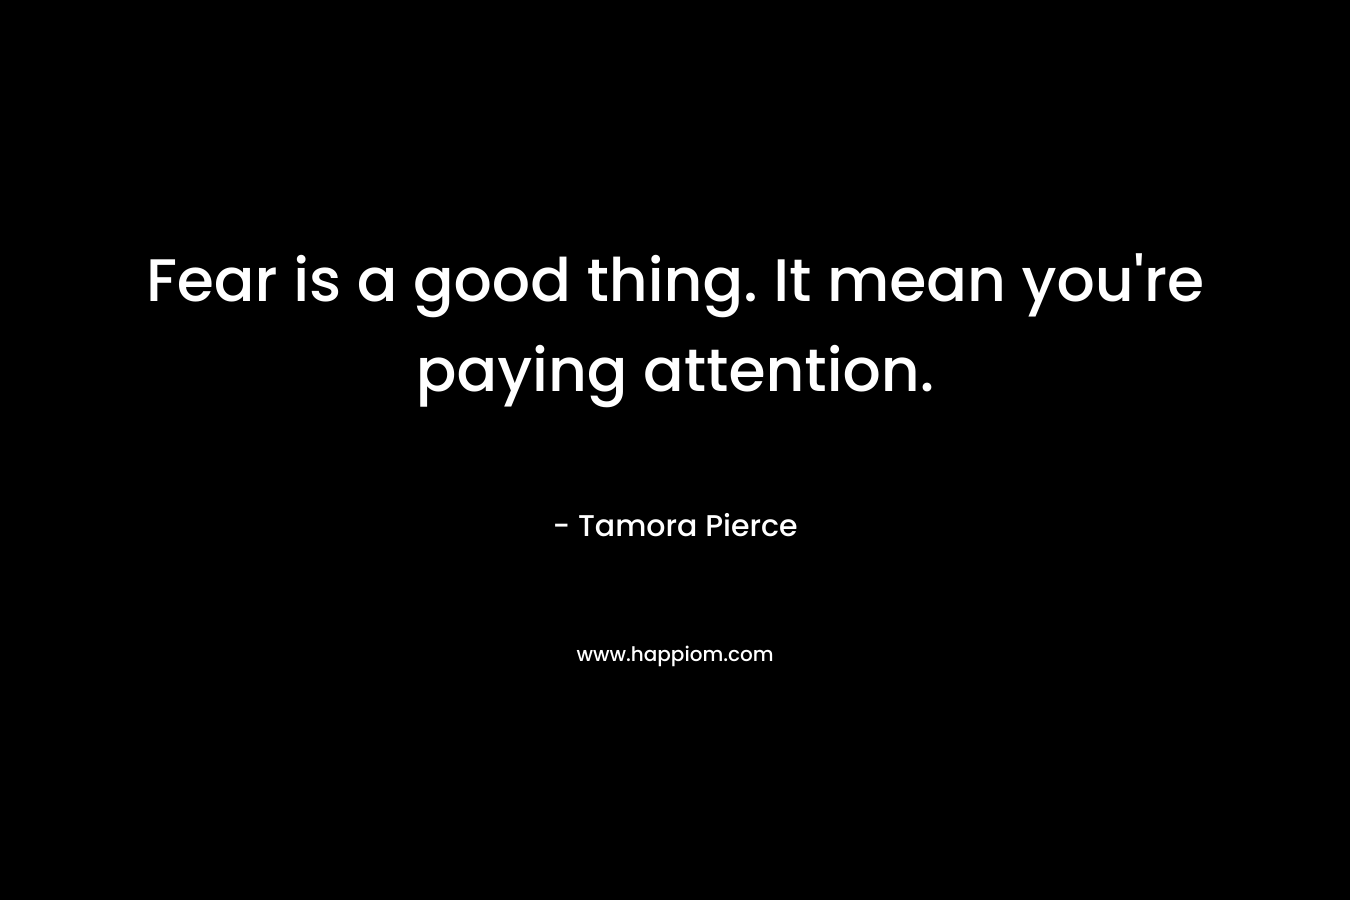 Fear is a good thing. It mean you're paying attention.